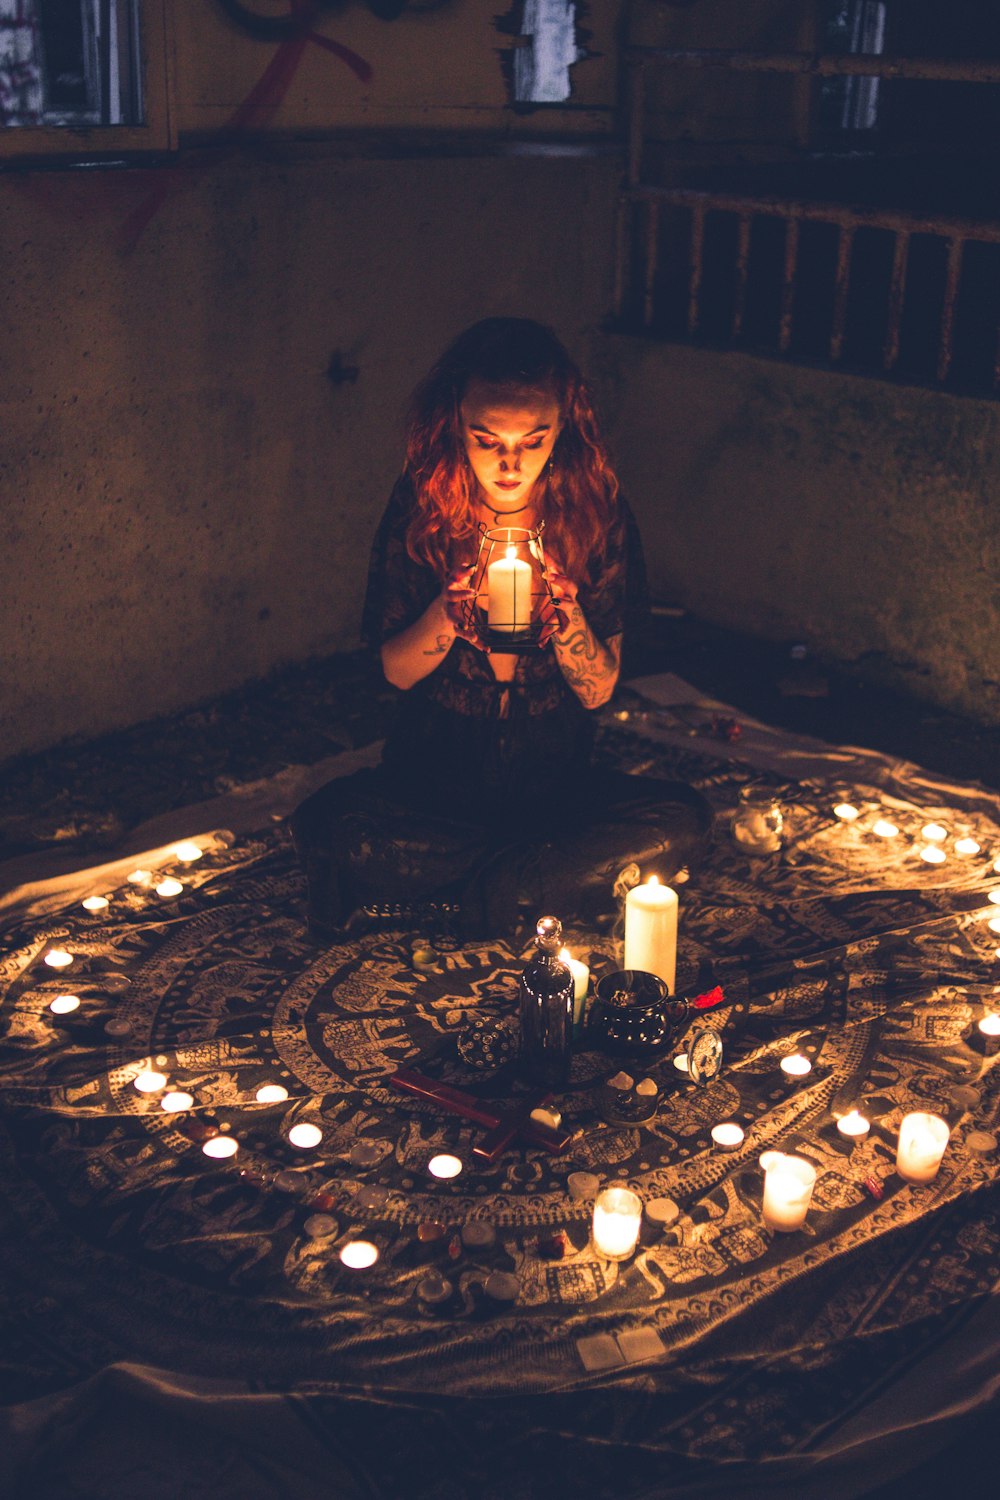 woman in black shirt sitting on floor with candles